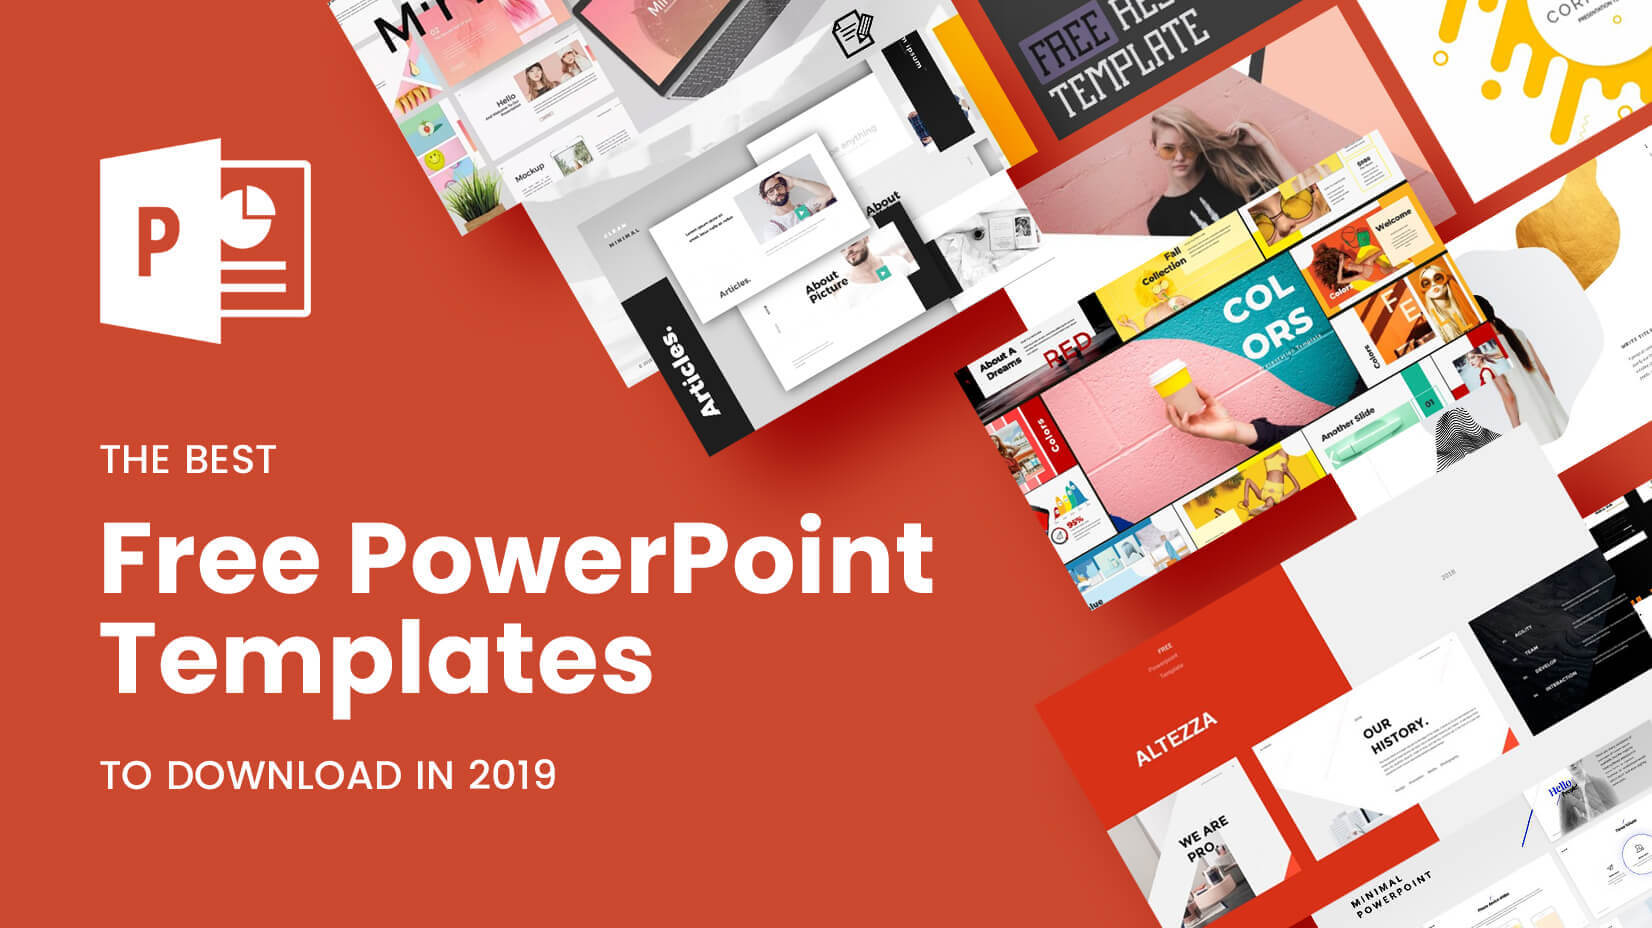 The Best Free Powerpoint Templates To Download In 2019 For Virus Powerpoint Template Free Download